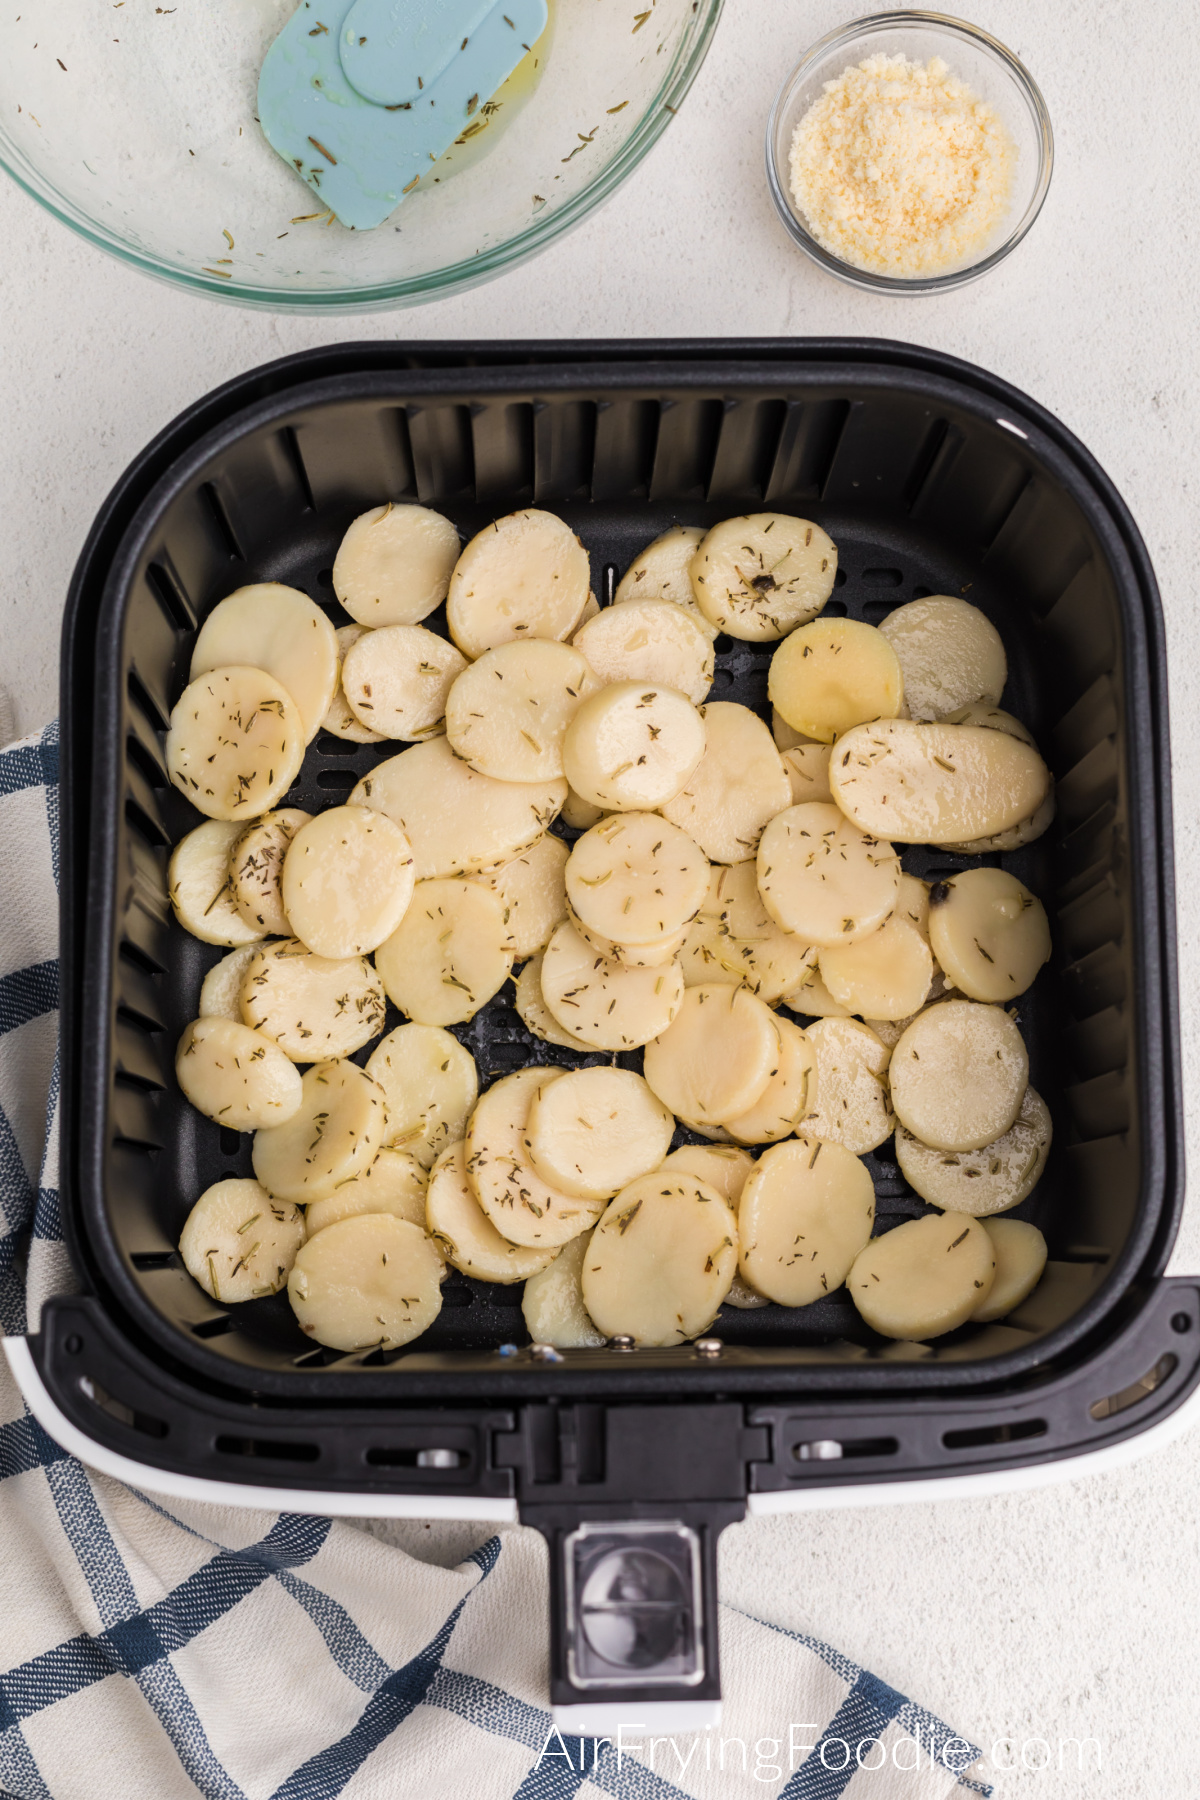 Sliced potatoes in air fryer basket, ready to be cooked.